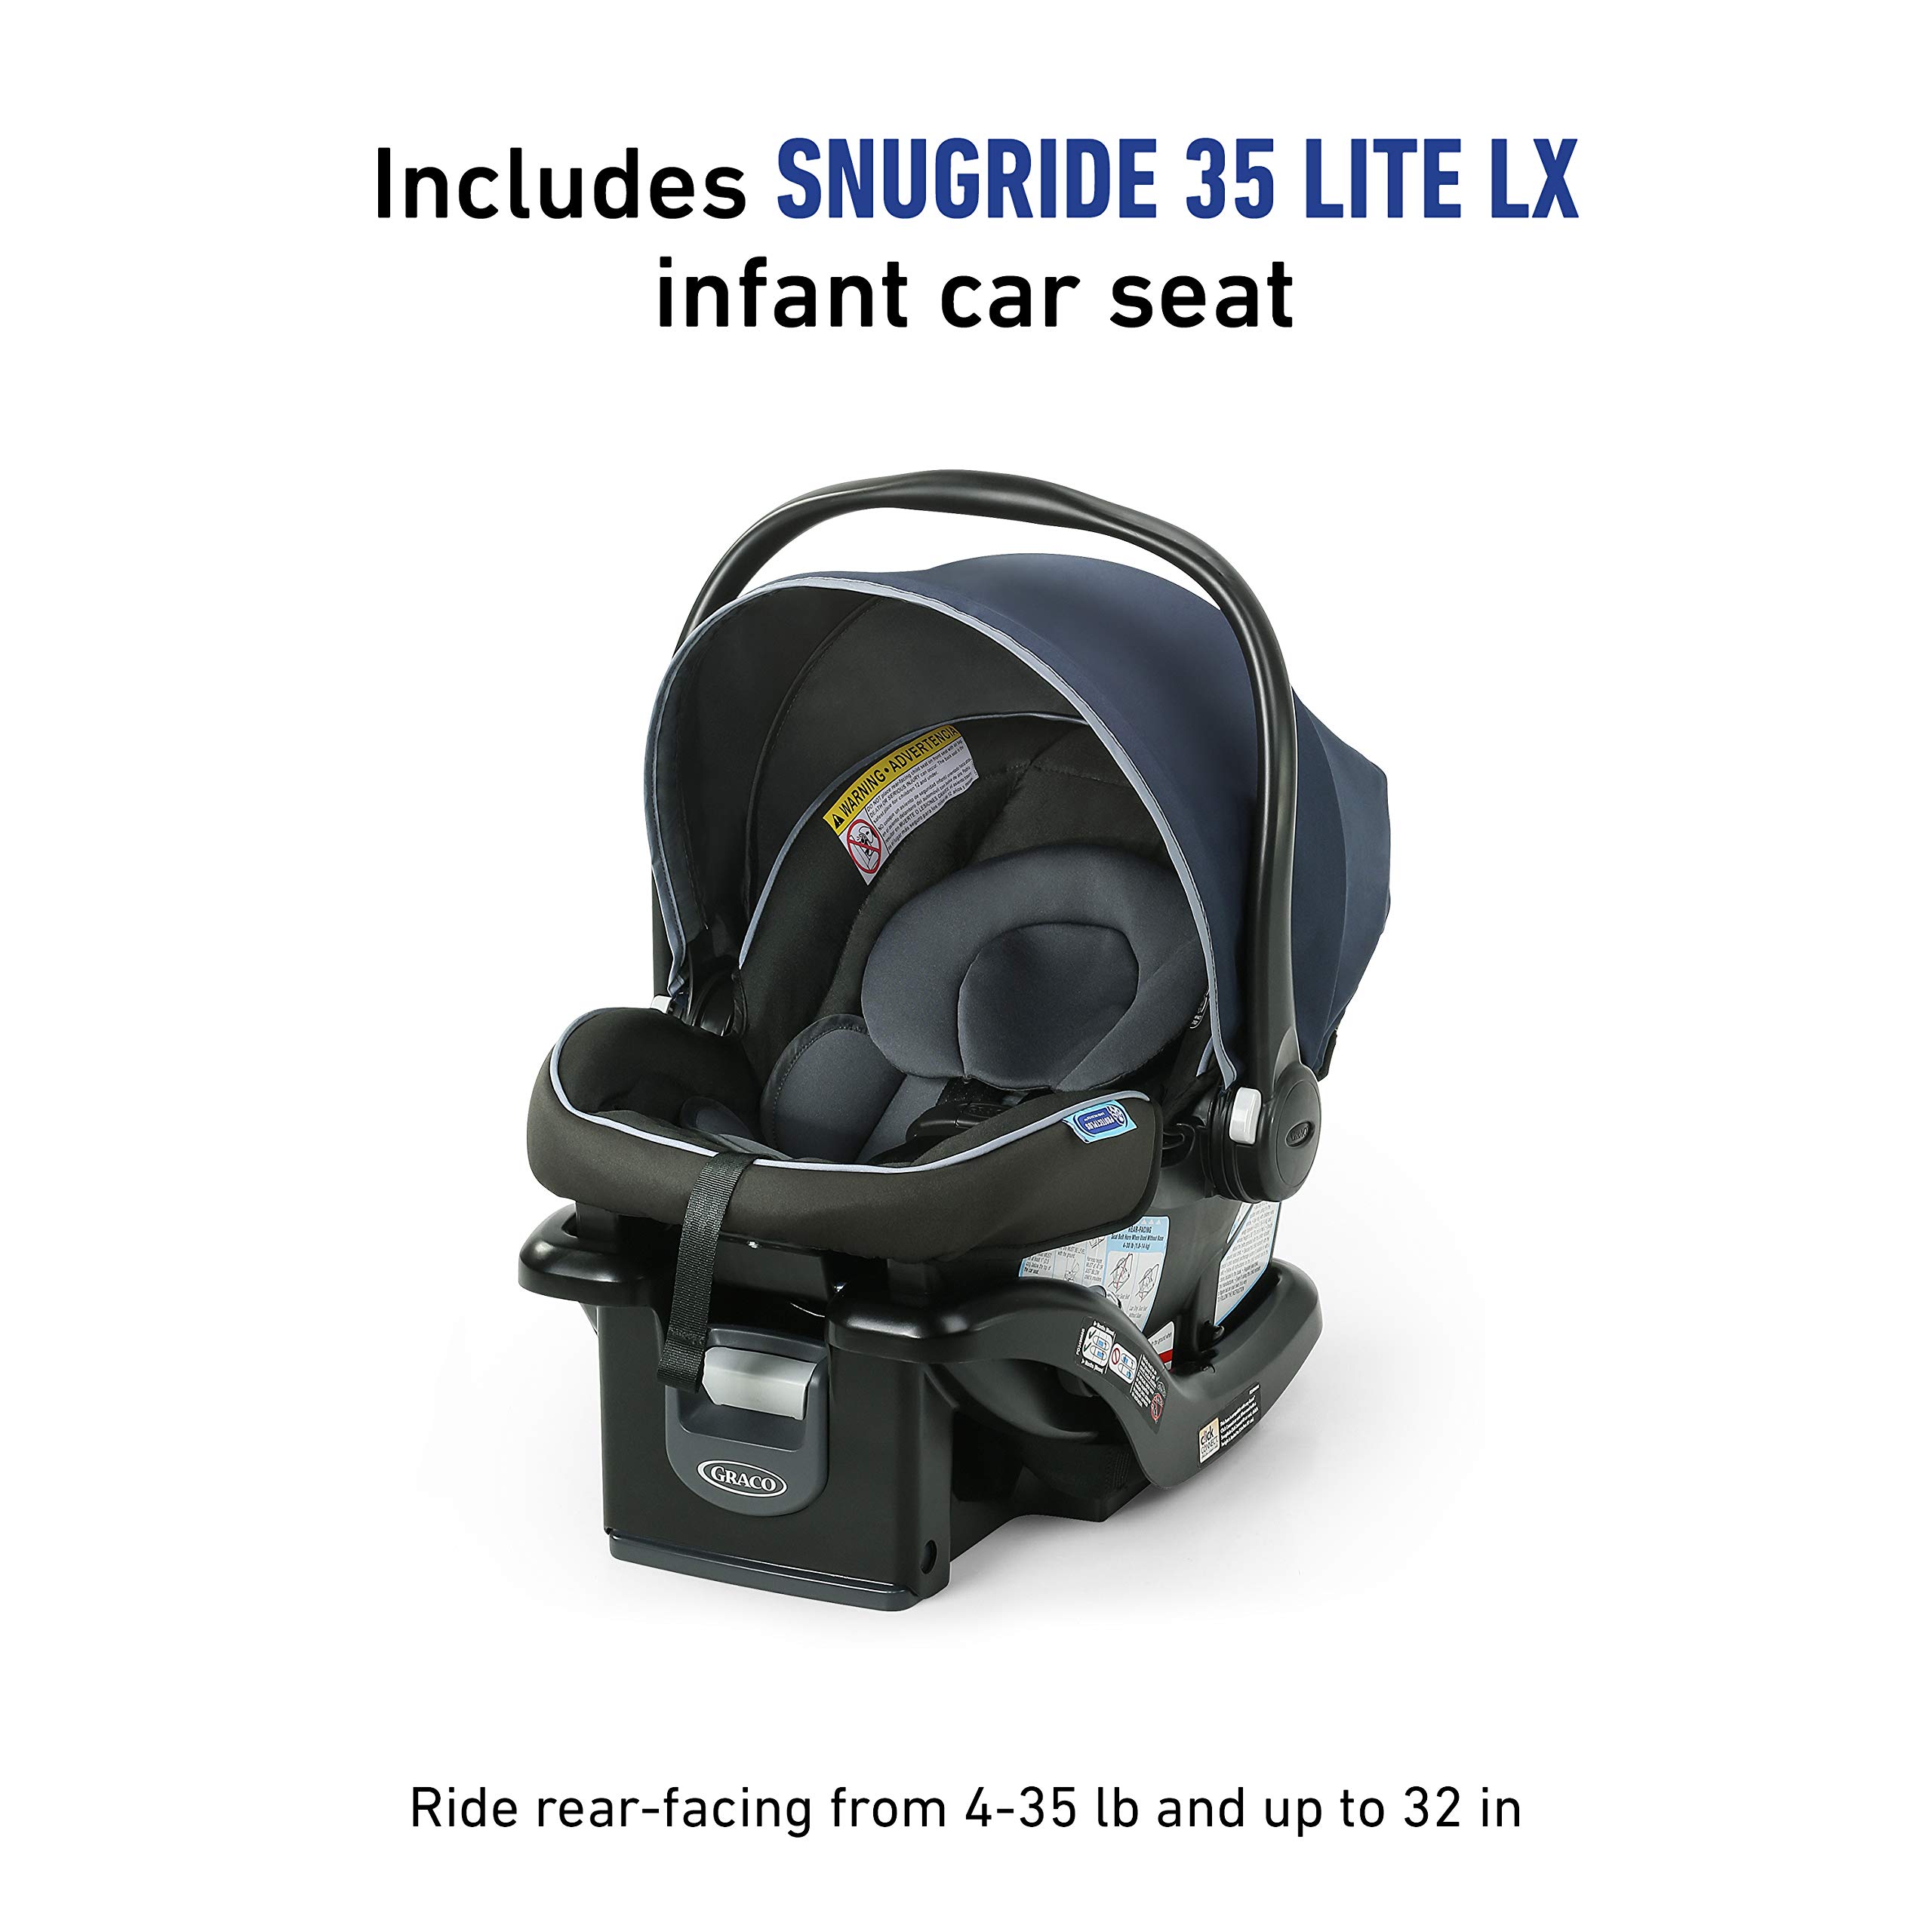 Graco Modes Element LX Travel System | Includes Baby Stroller with Reversible Seat, Extra Storage, Child Tray, One Hand Fold and SnugRide® 35 Lite LX Infant Car Seat, Lanier